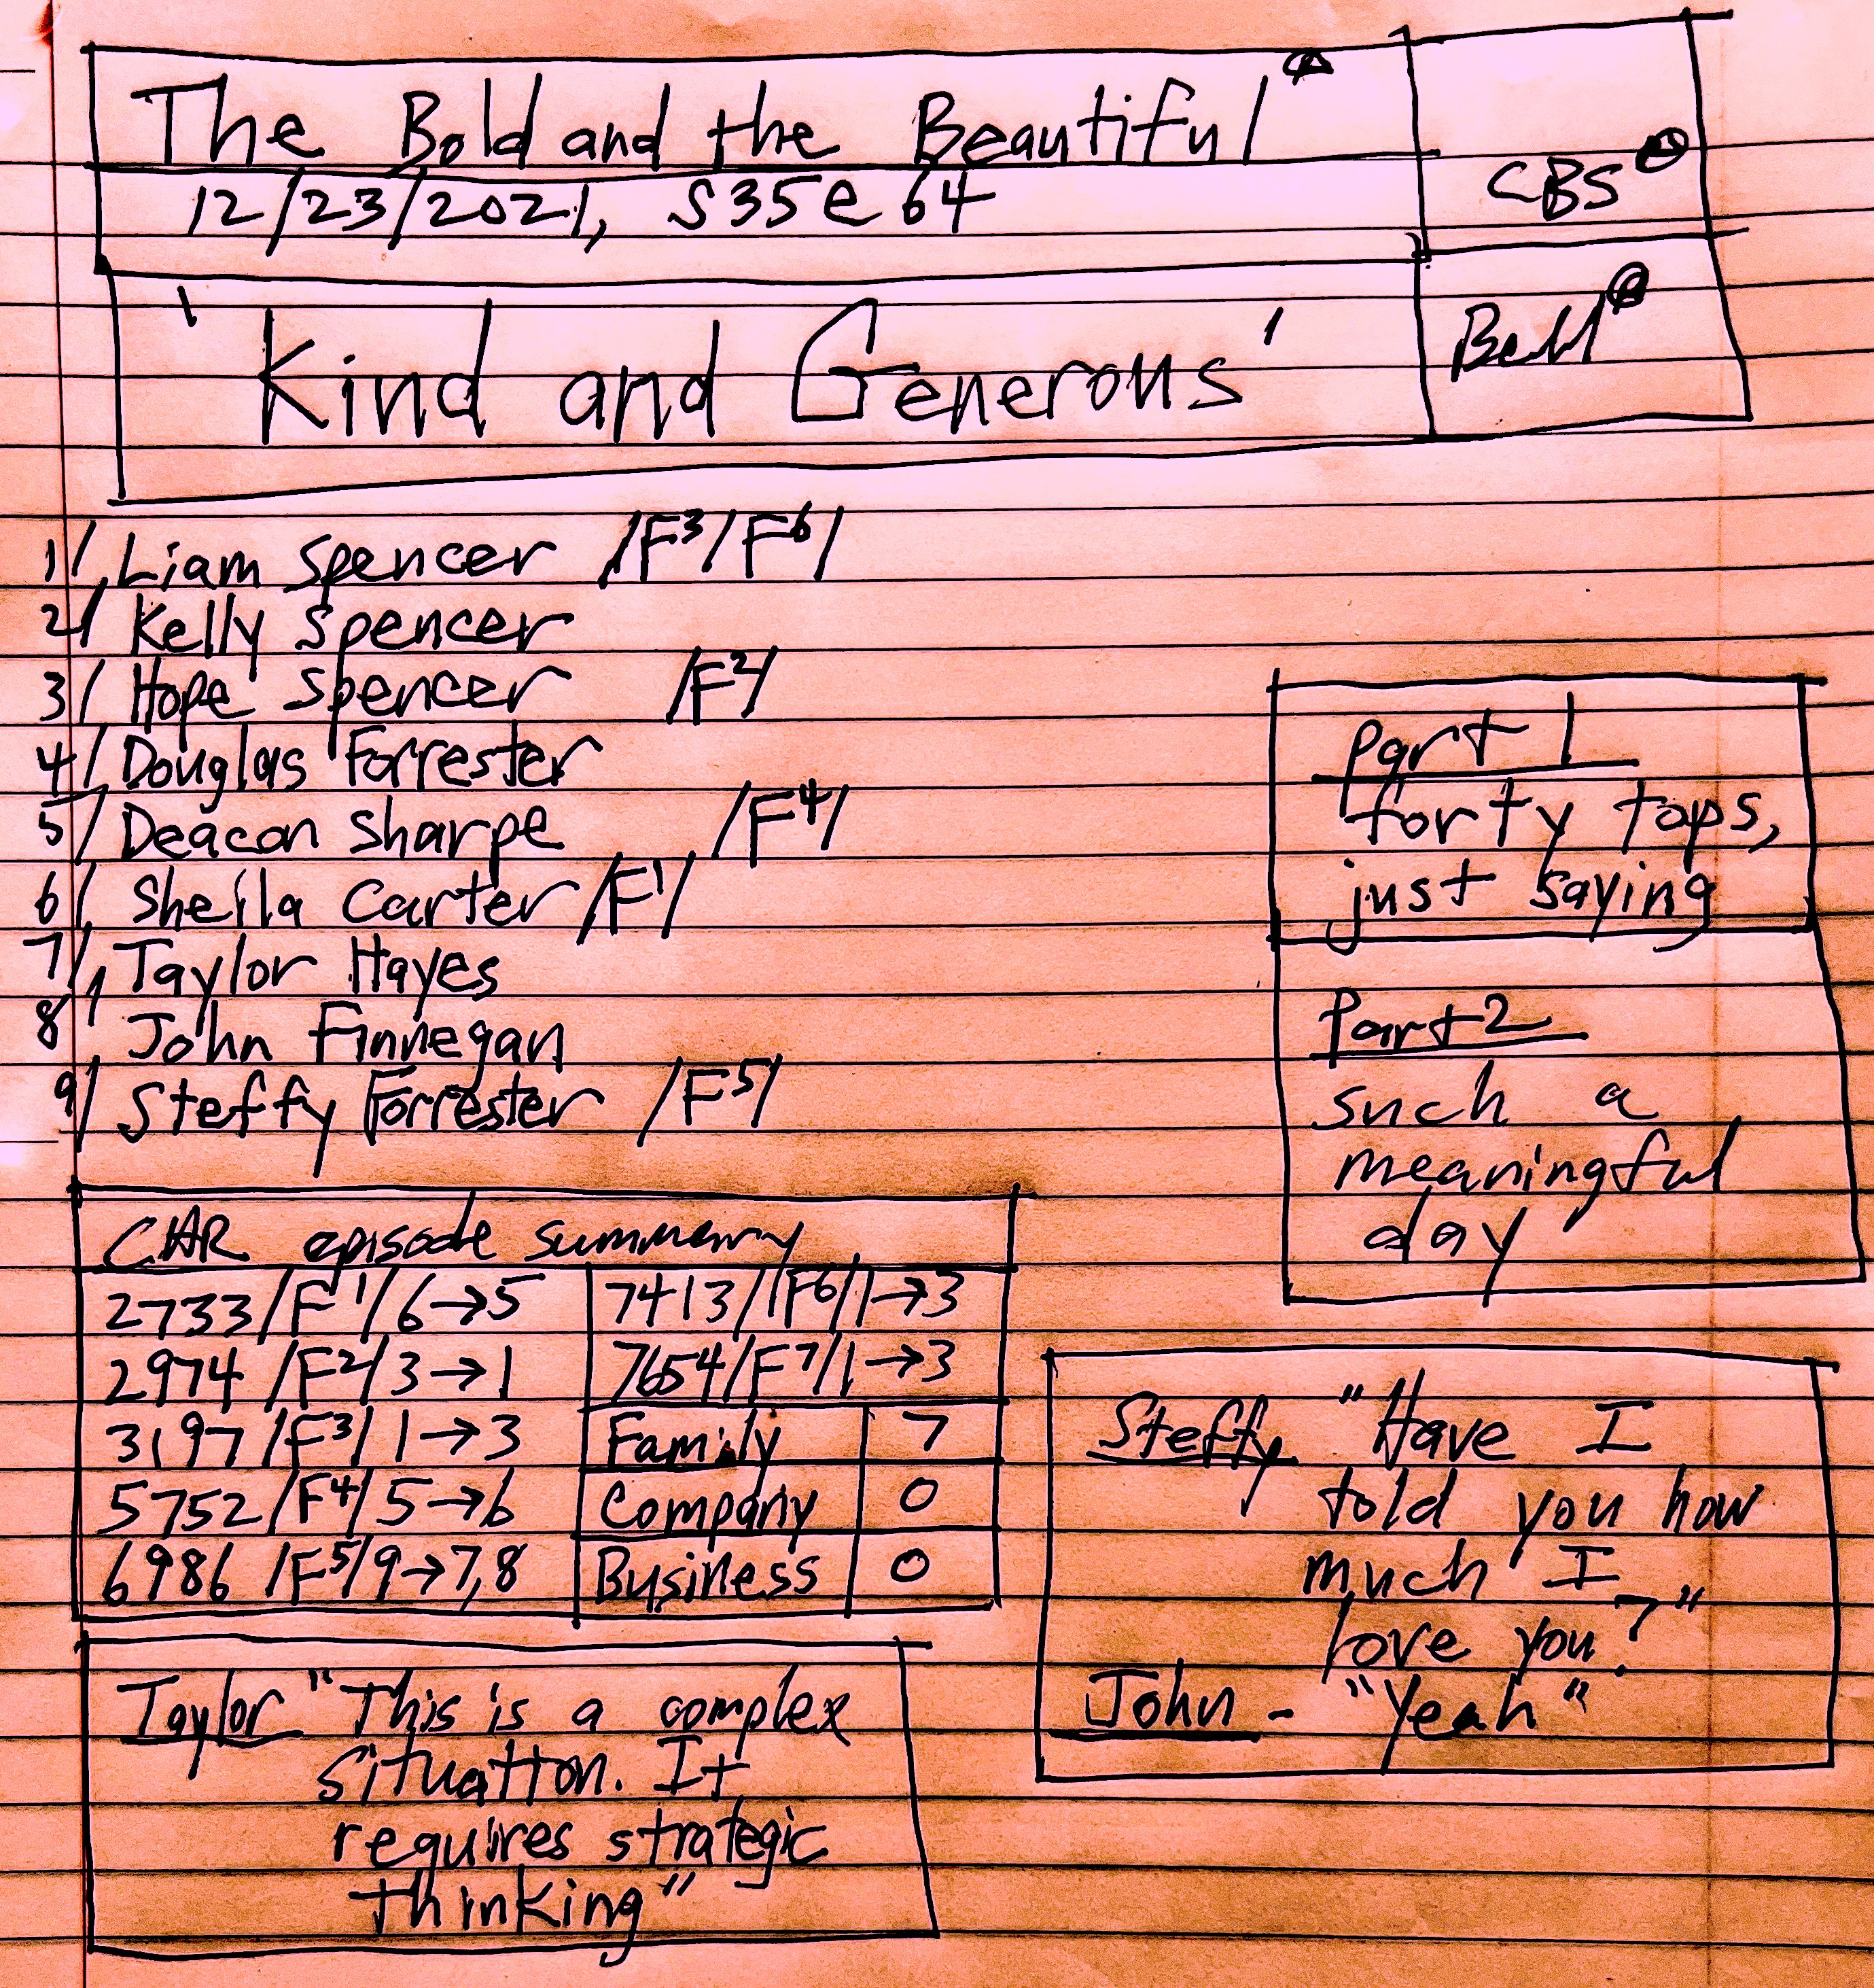 'Kind and Generous' | #bb, 12:23:2021